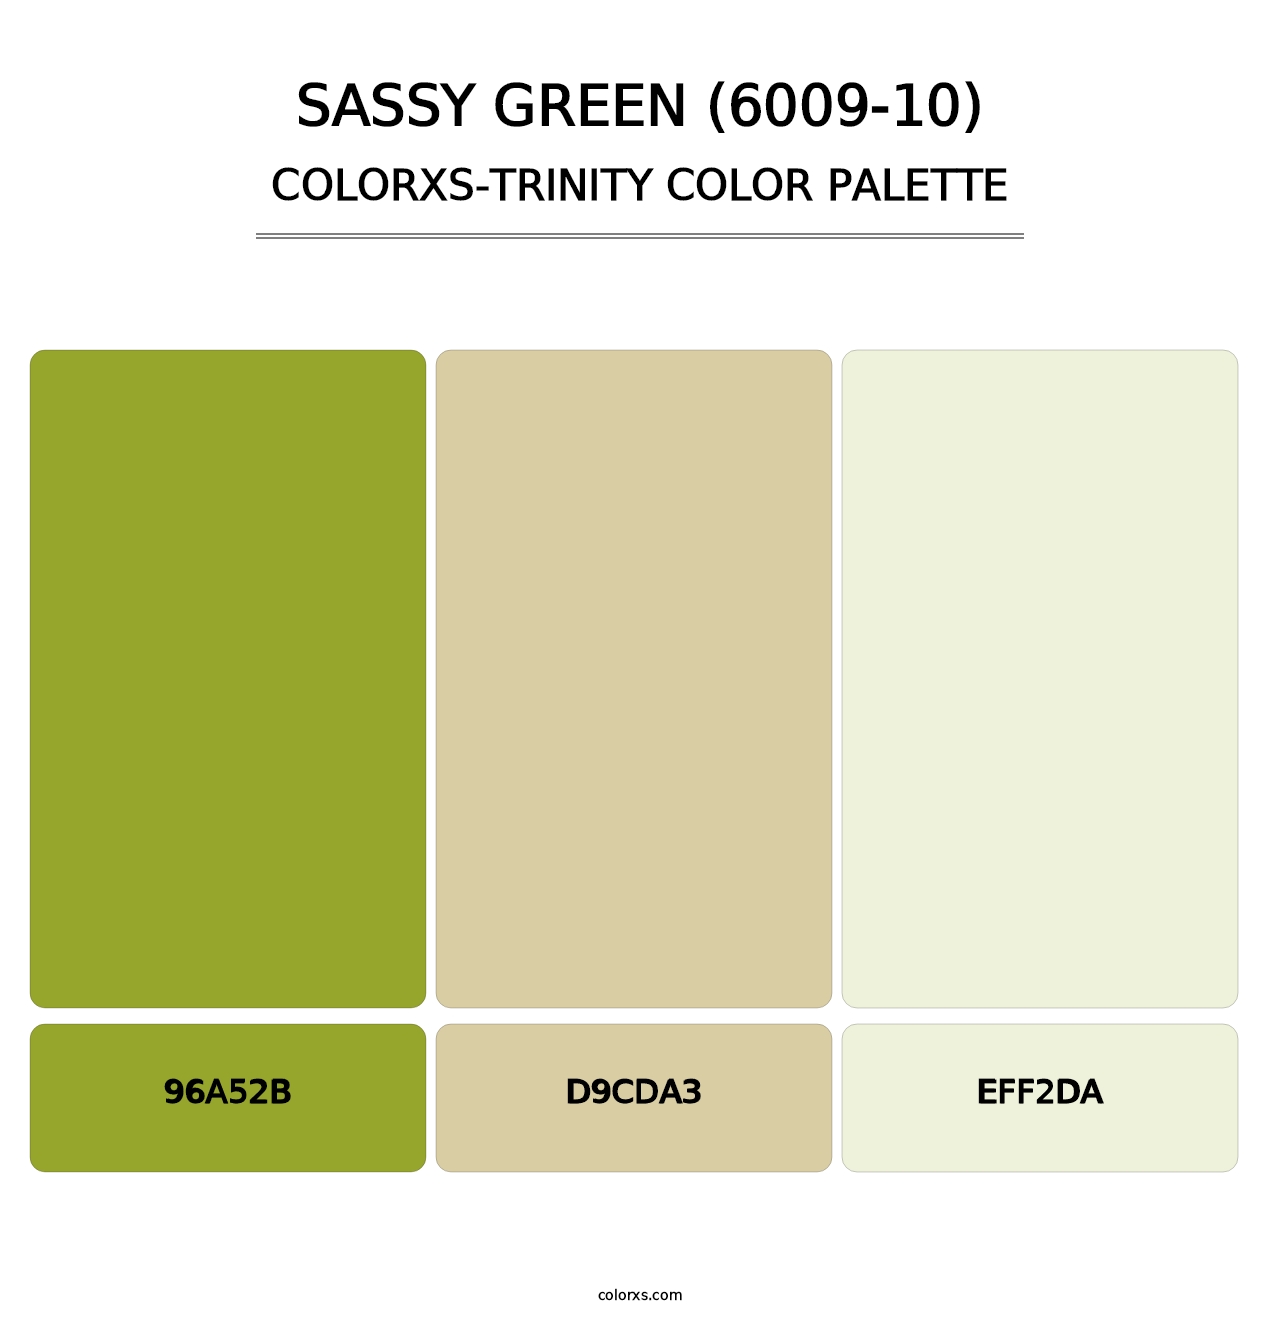 Sassy Green (6009-10) - Colorxs Trinity Palette